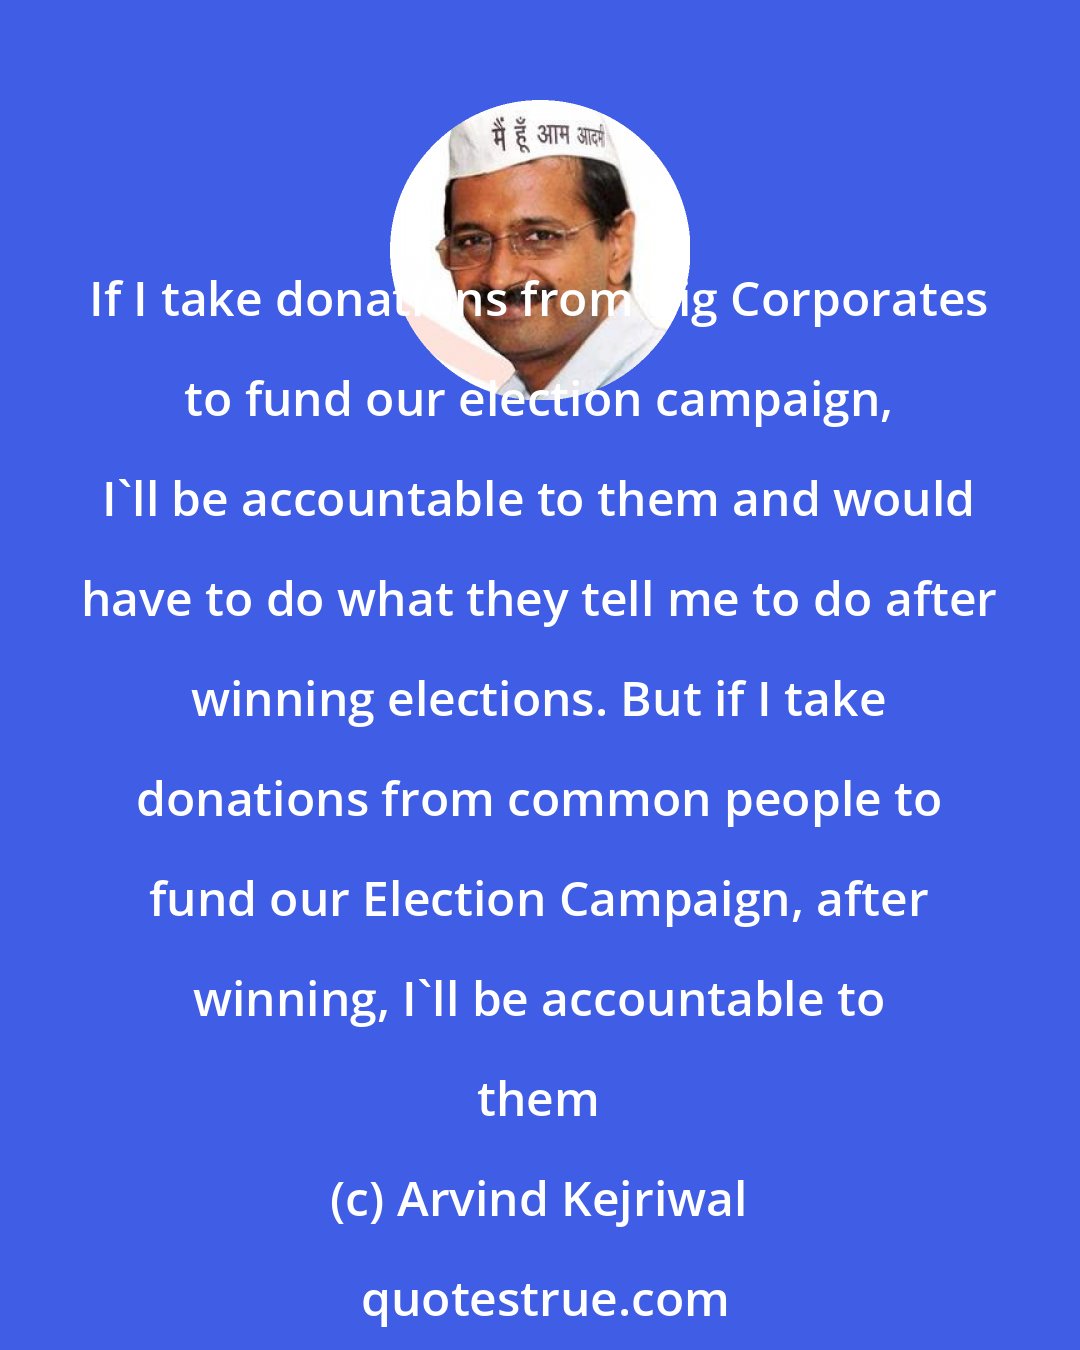 Arvind Kejriwal: If I take donations from Big Corporates to fund our election campaign, I'll be accountable to them and would have to do what they tell me to do after winning elections. But if I take donations from common people to fund our Election Campaign, after winning, I'll be accountable to them